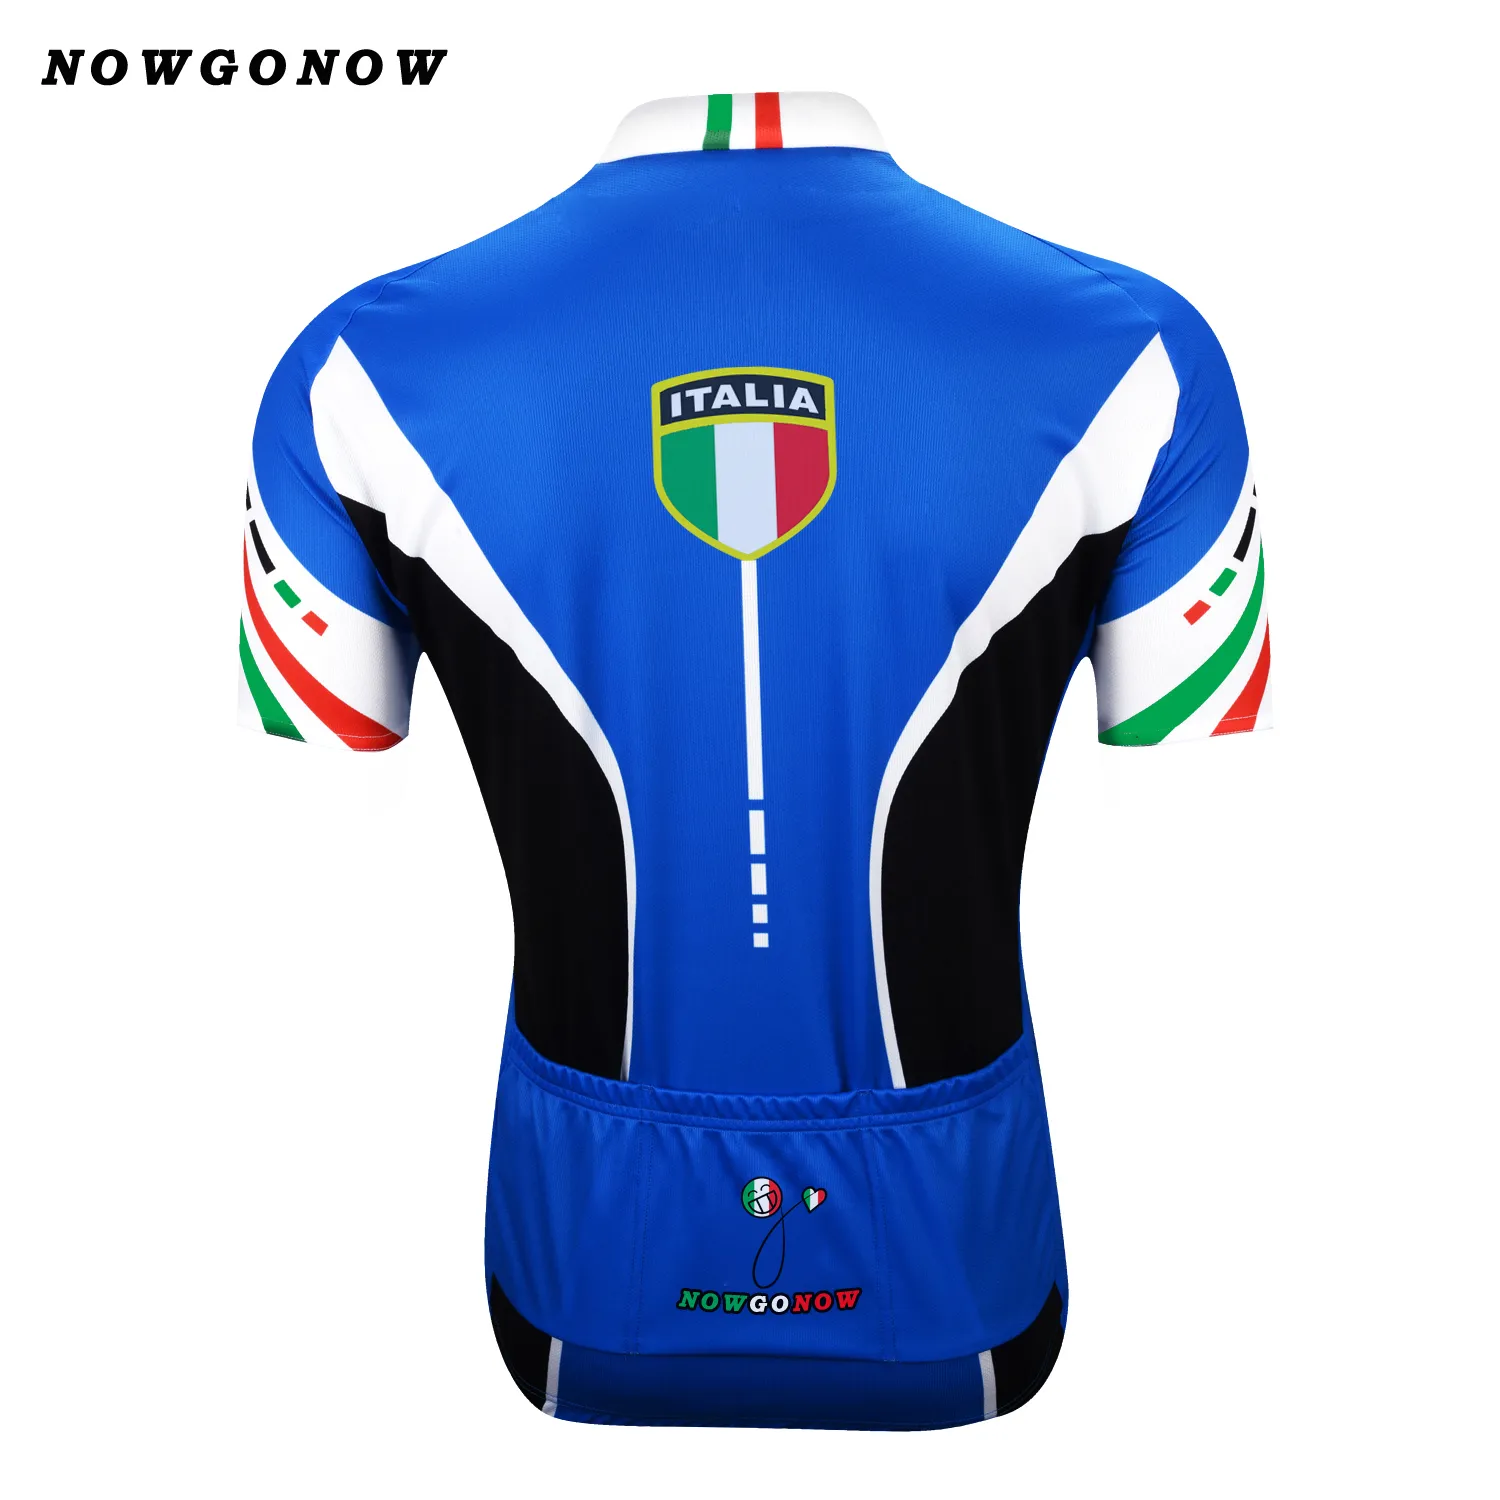 Tour 2017 Radsport Jersey Männer Blue Italy Pro Team Kleidungsrad Kleidung Nowgonow Tops Road Racing Mountain Triathlon Sommer MAILLOT CI310E